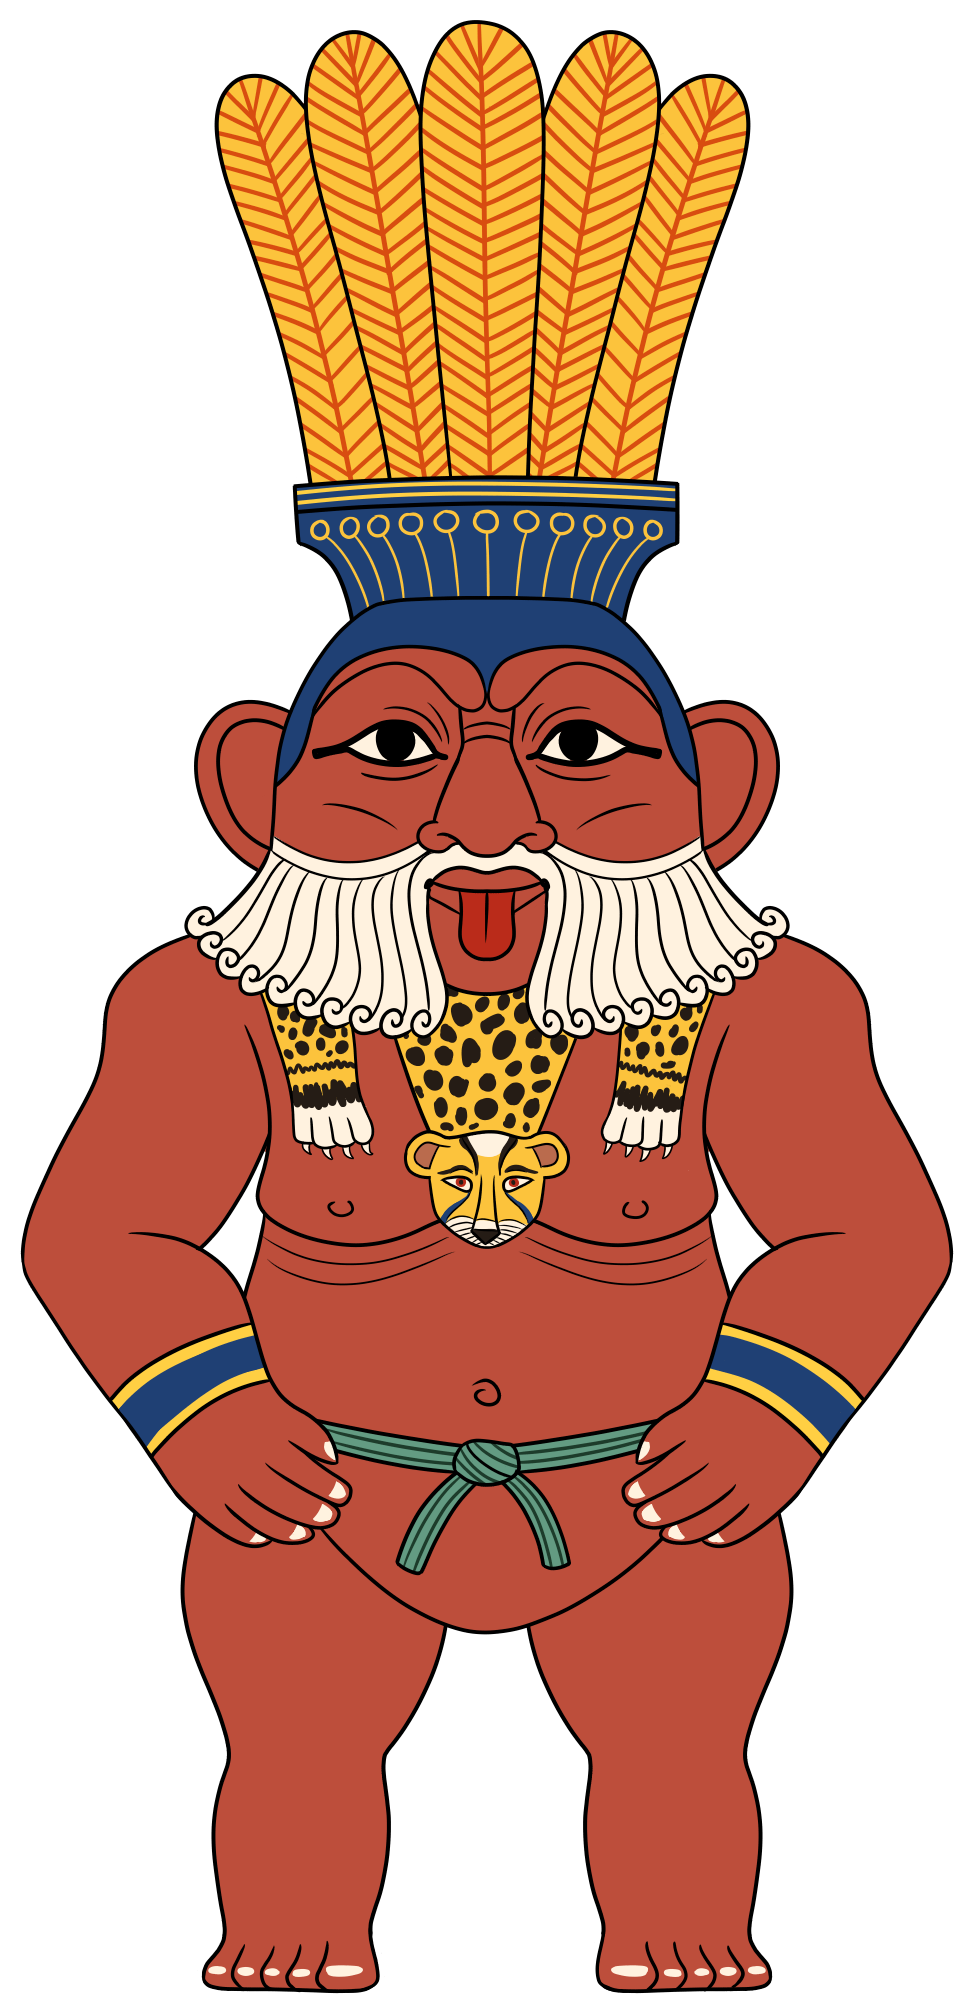 The Ancient Egyptian God Bes on a Granite Bay Graphic Design Microsite